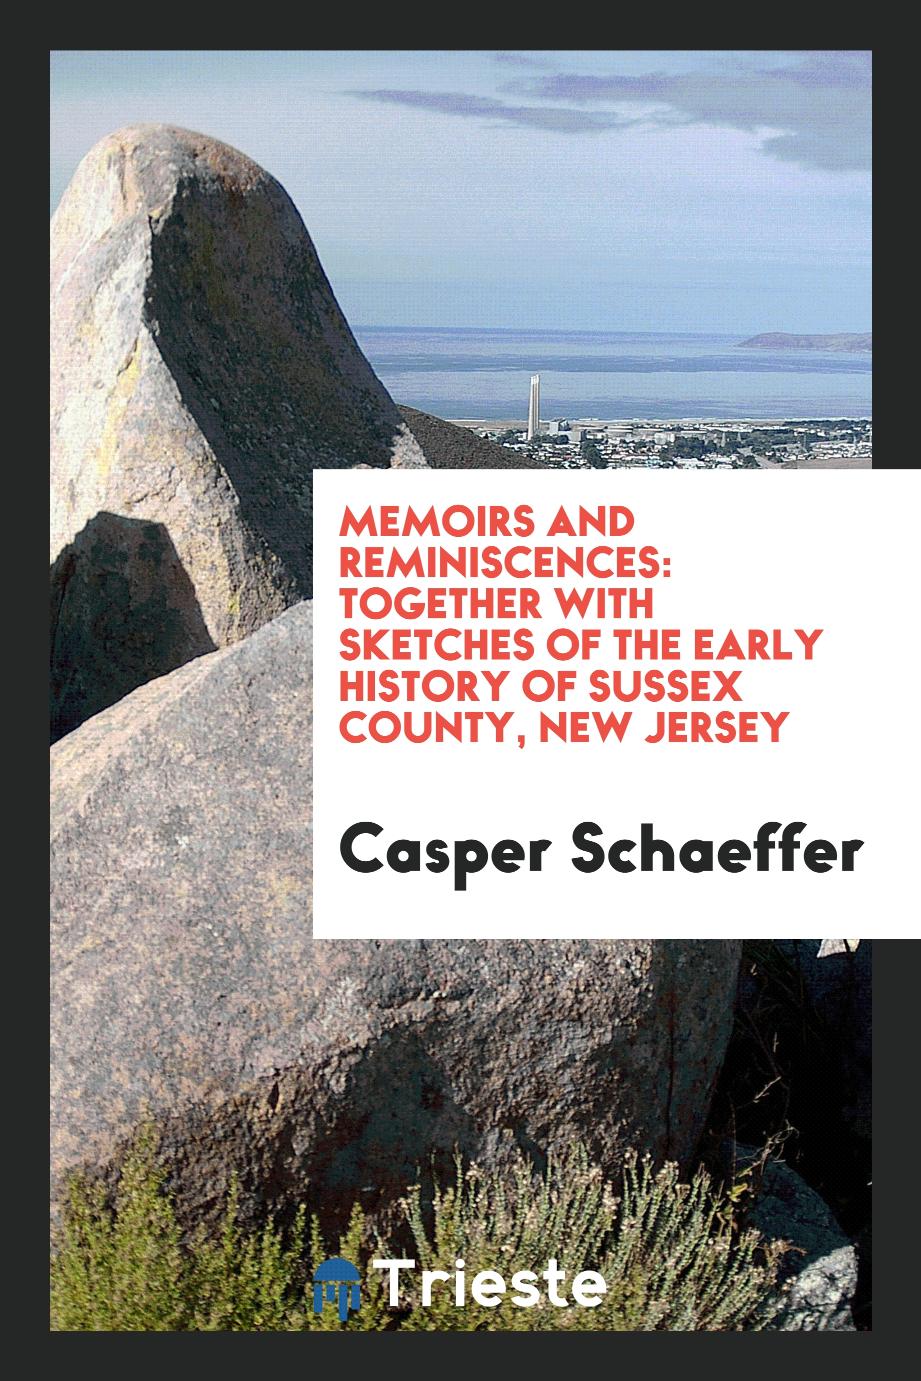 Memoirs and reminiscences: together with sketches of the early history of Sussex County, New Jersey